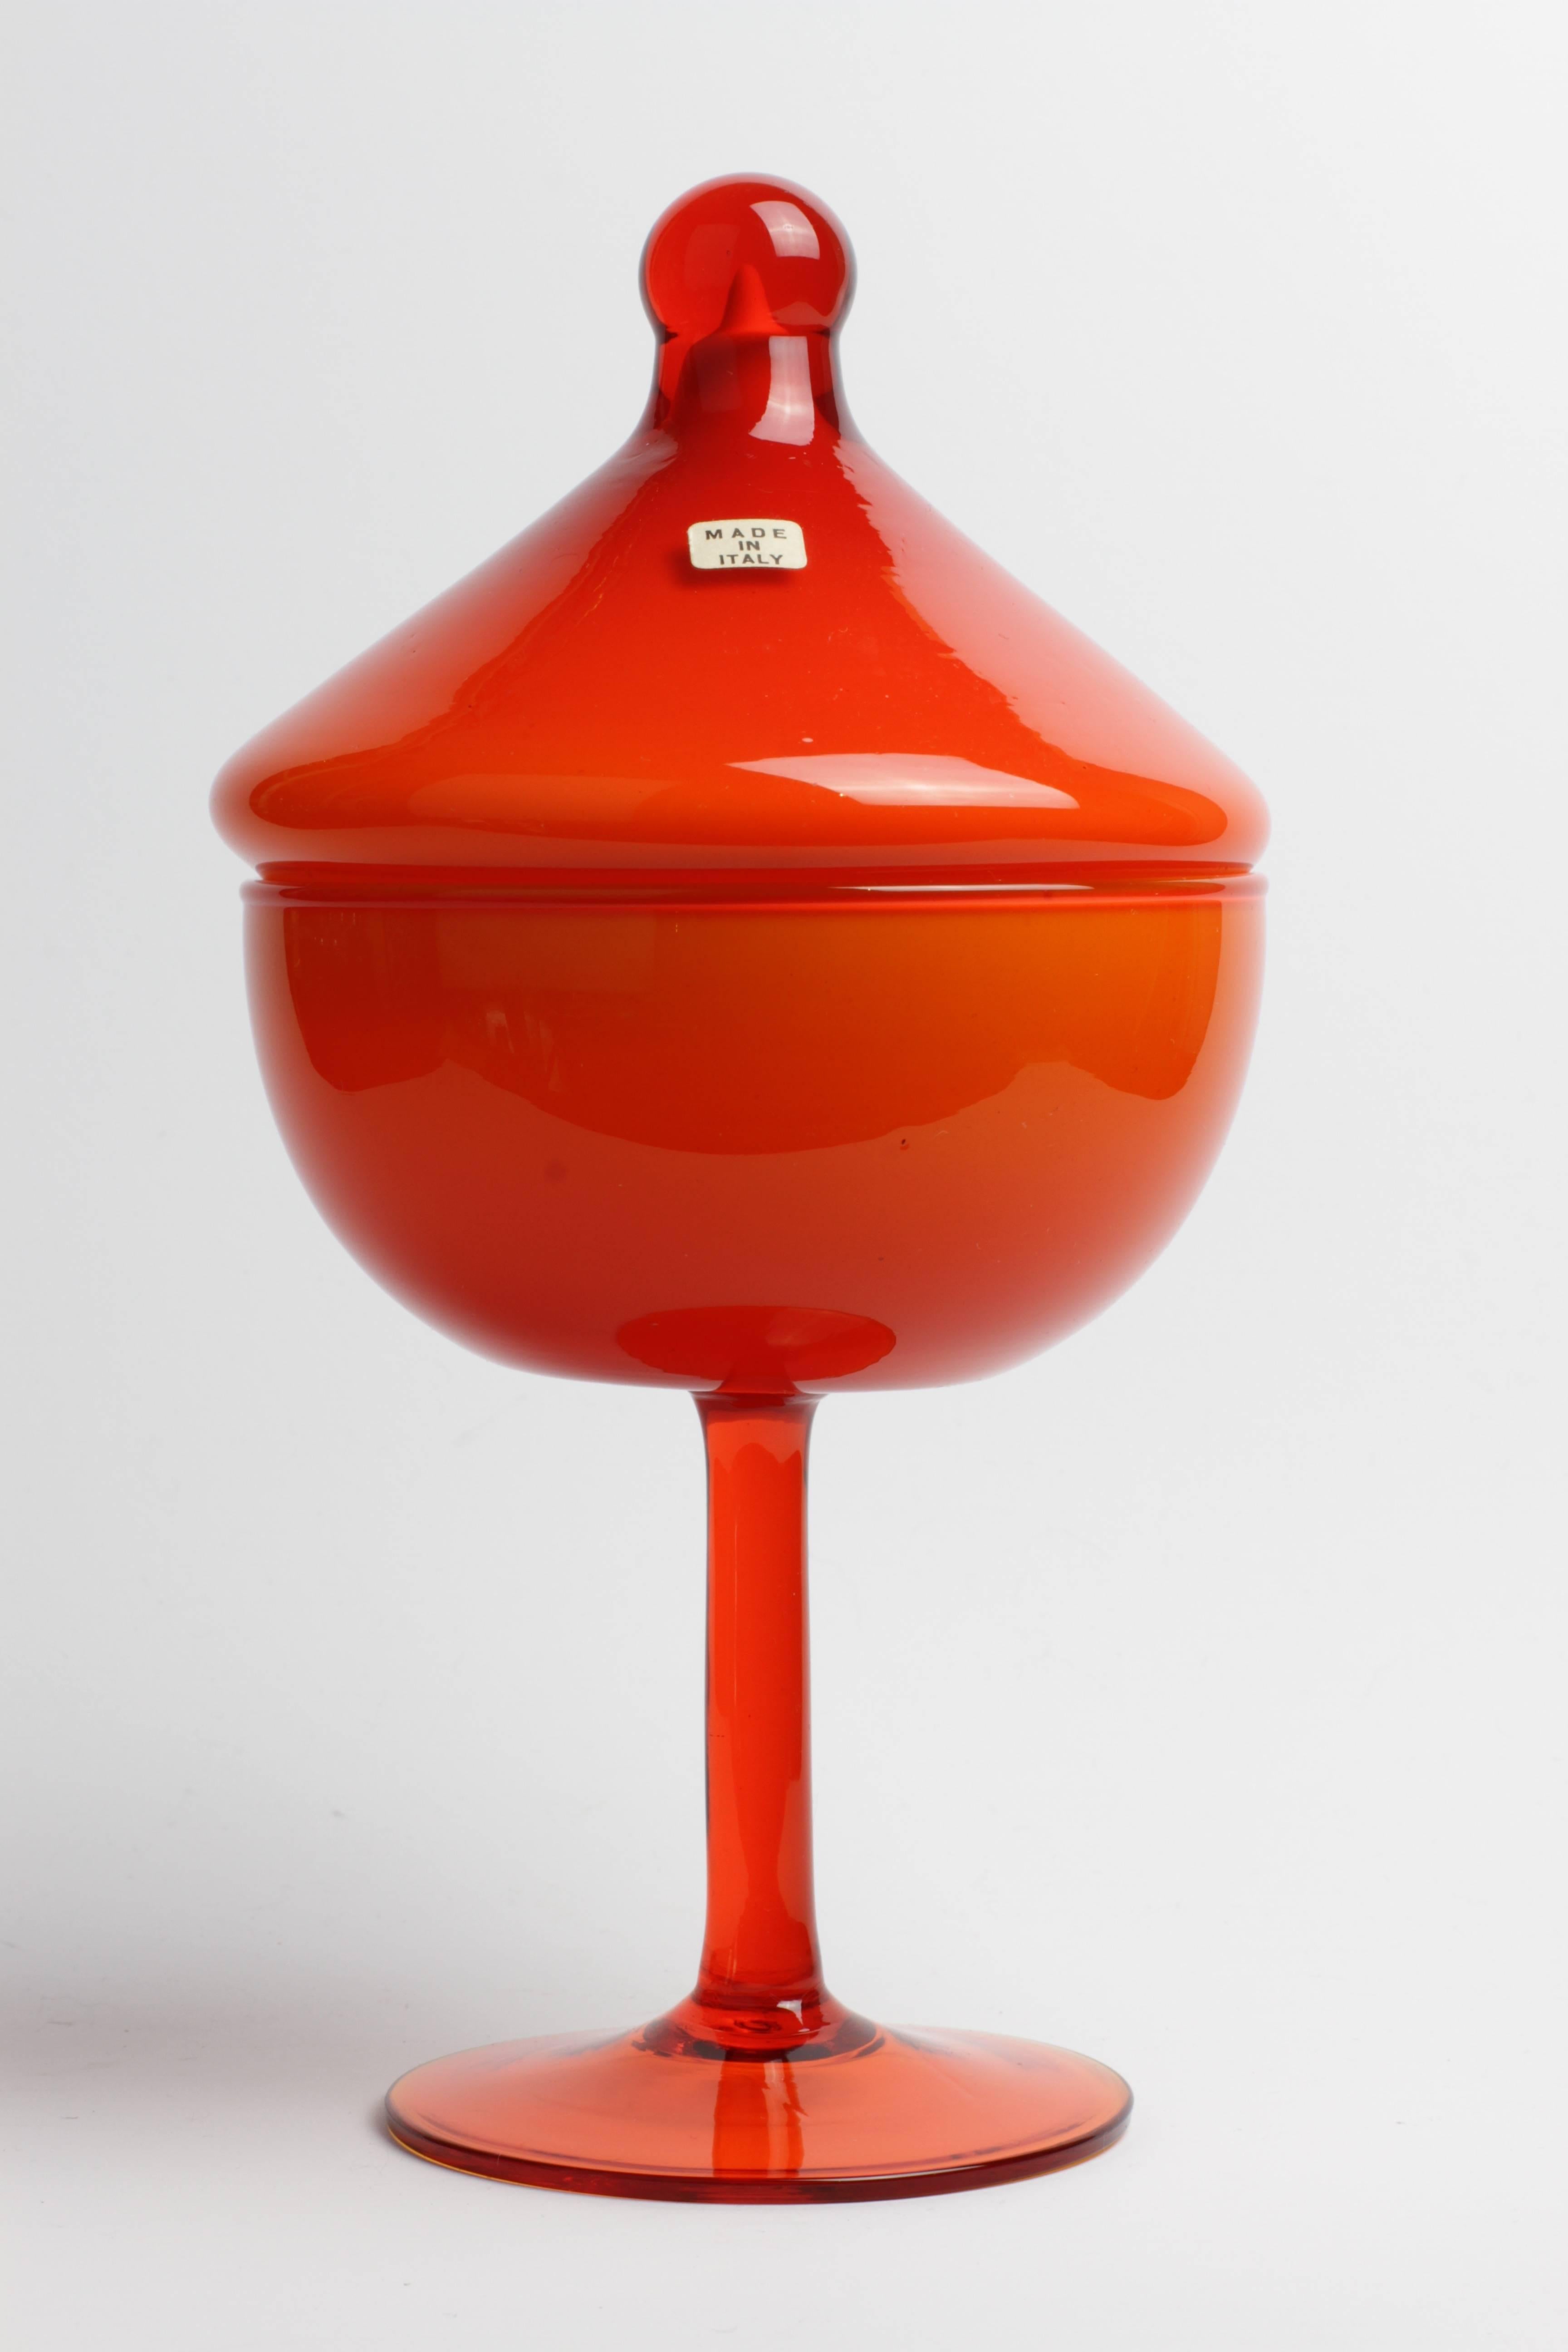 A lovely little piece of Mid-Century Italian glass, possibly made in Murano. This colorful and fun lidded jar features vibrant cear orange glass over white milk glass and would be perfect for keeping sweets or biscottis hidden away for those rainy